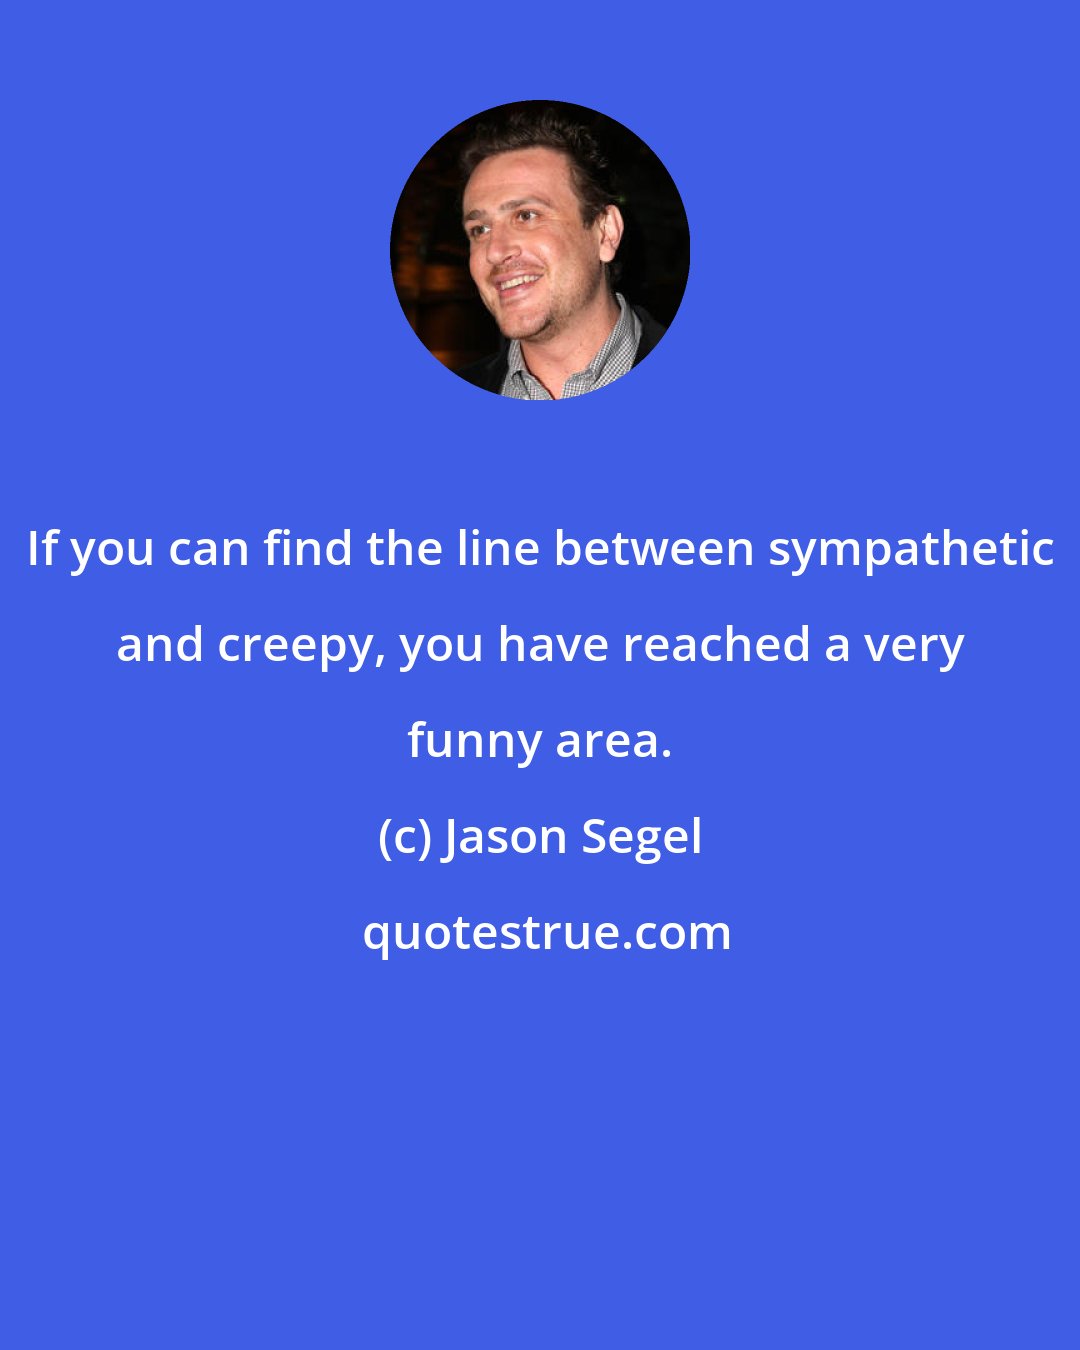 Jason Segel: If you can find the line between sympathetic and creepy, you have reached a very funny area.